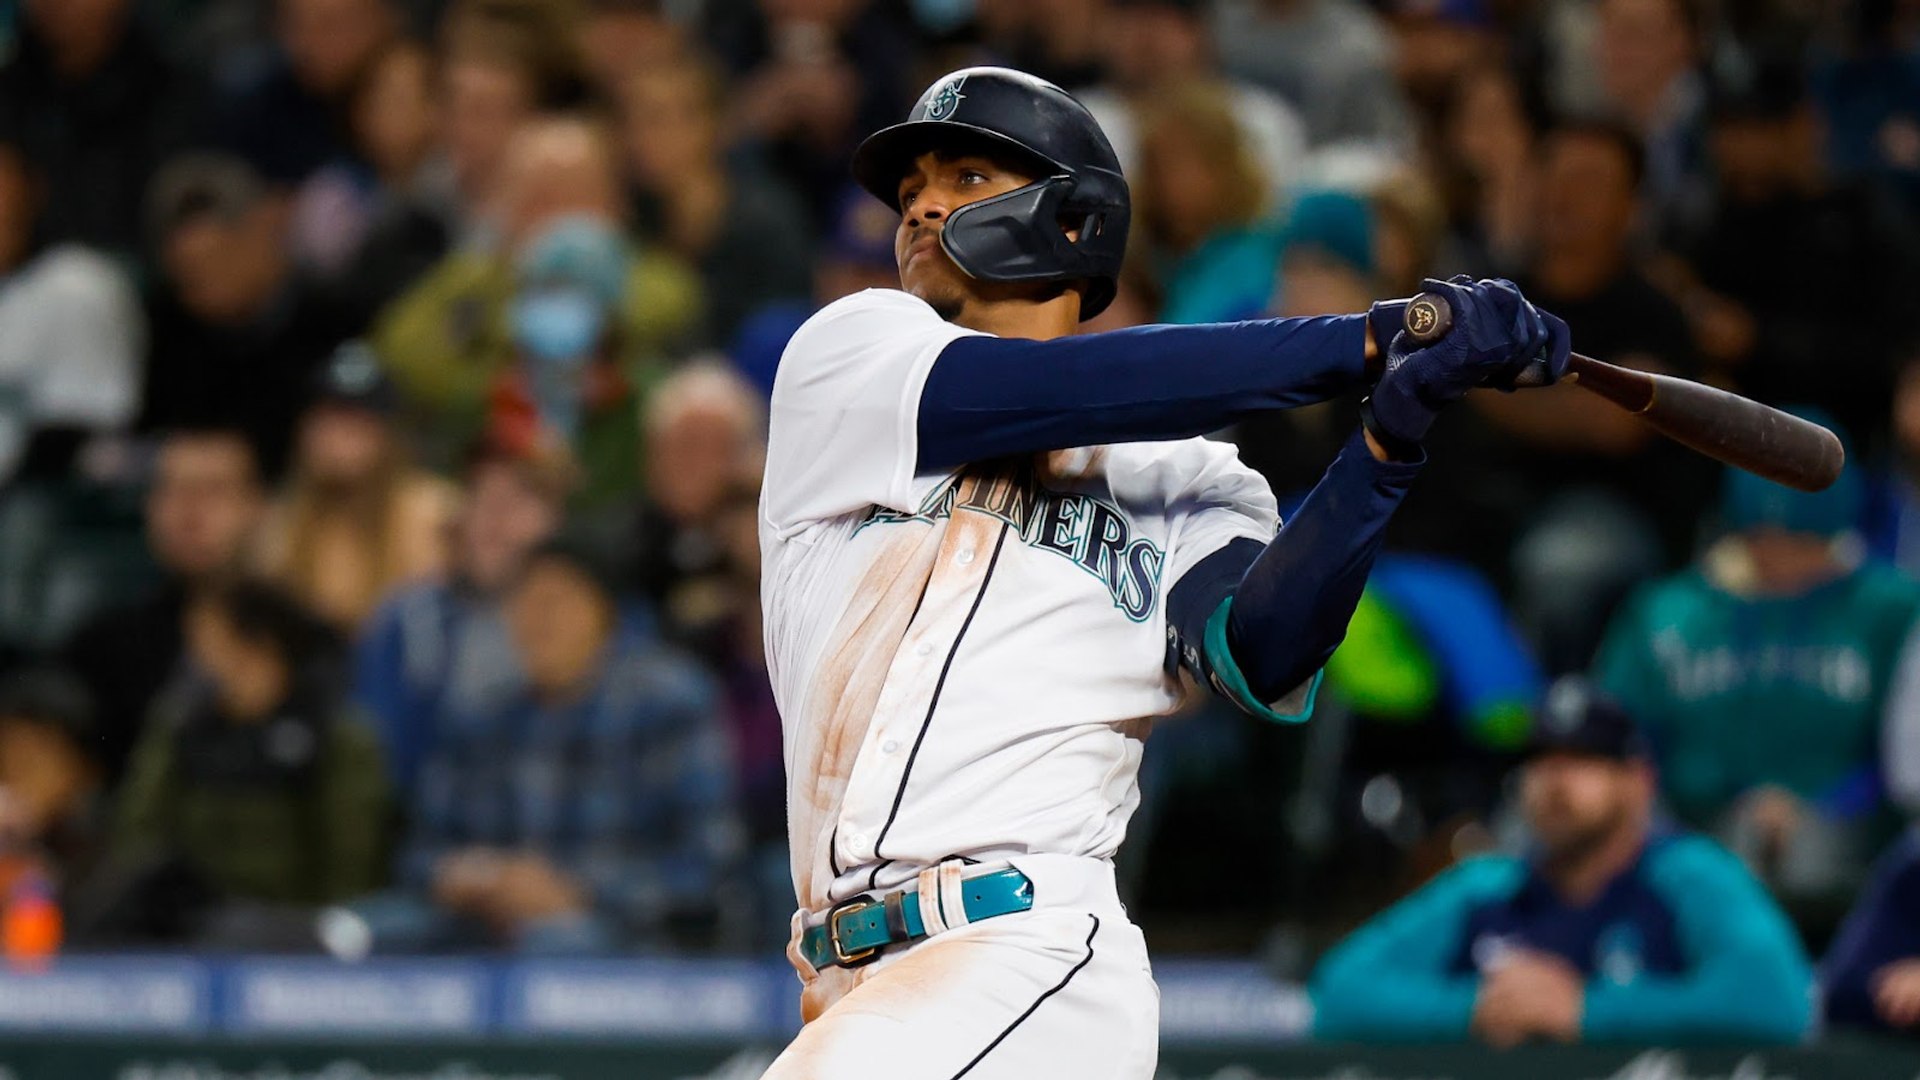 Julio Rodriguez To Sign A 14 Year Extension With The Mariners